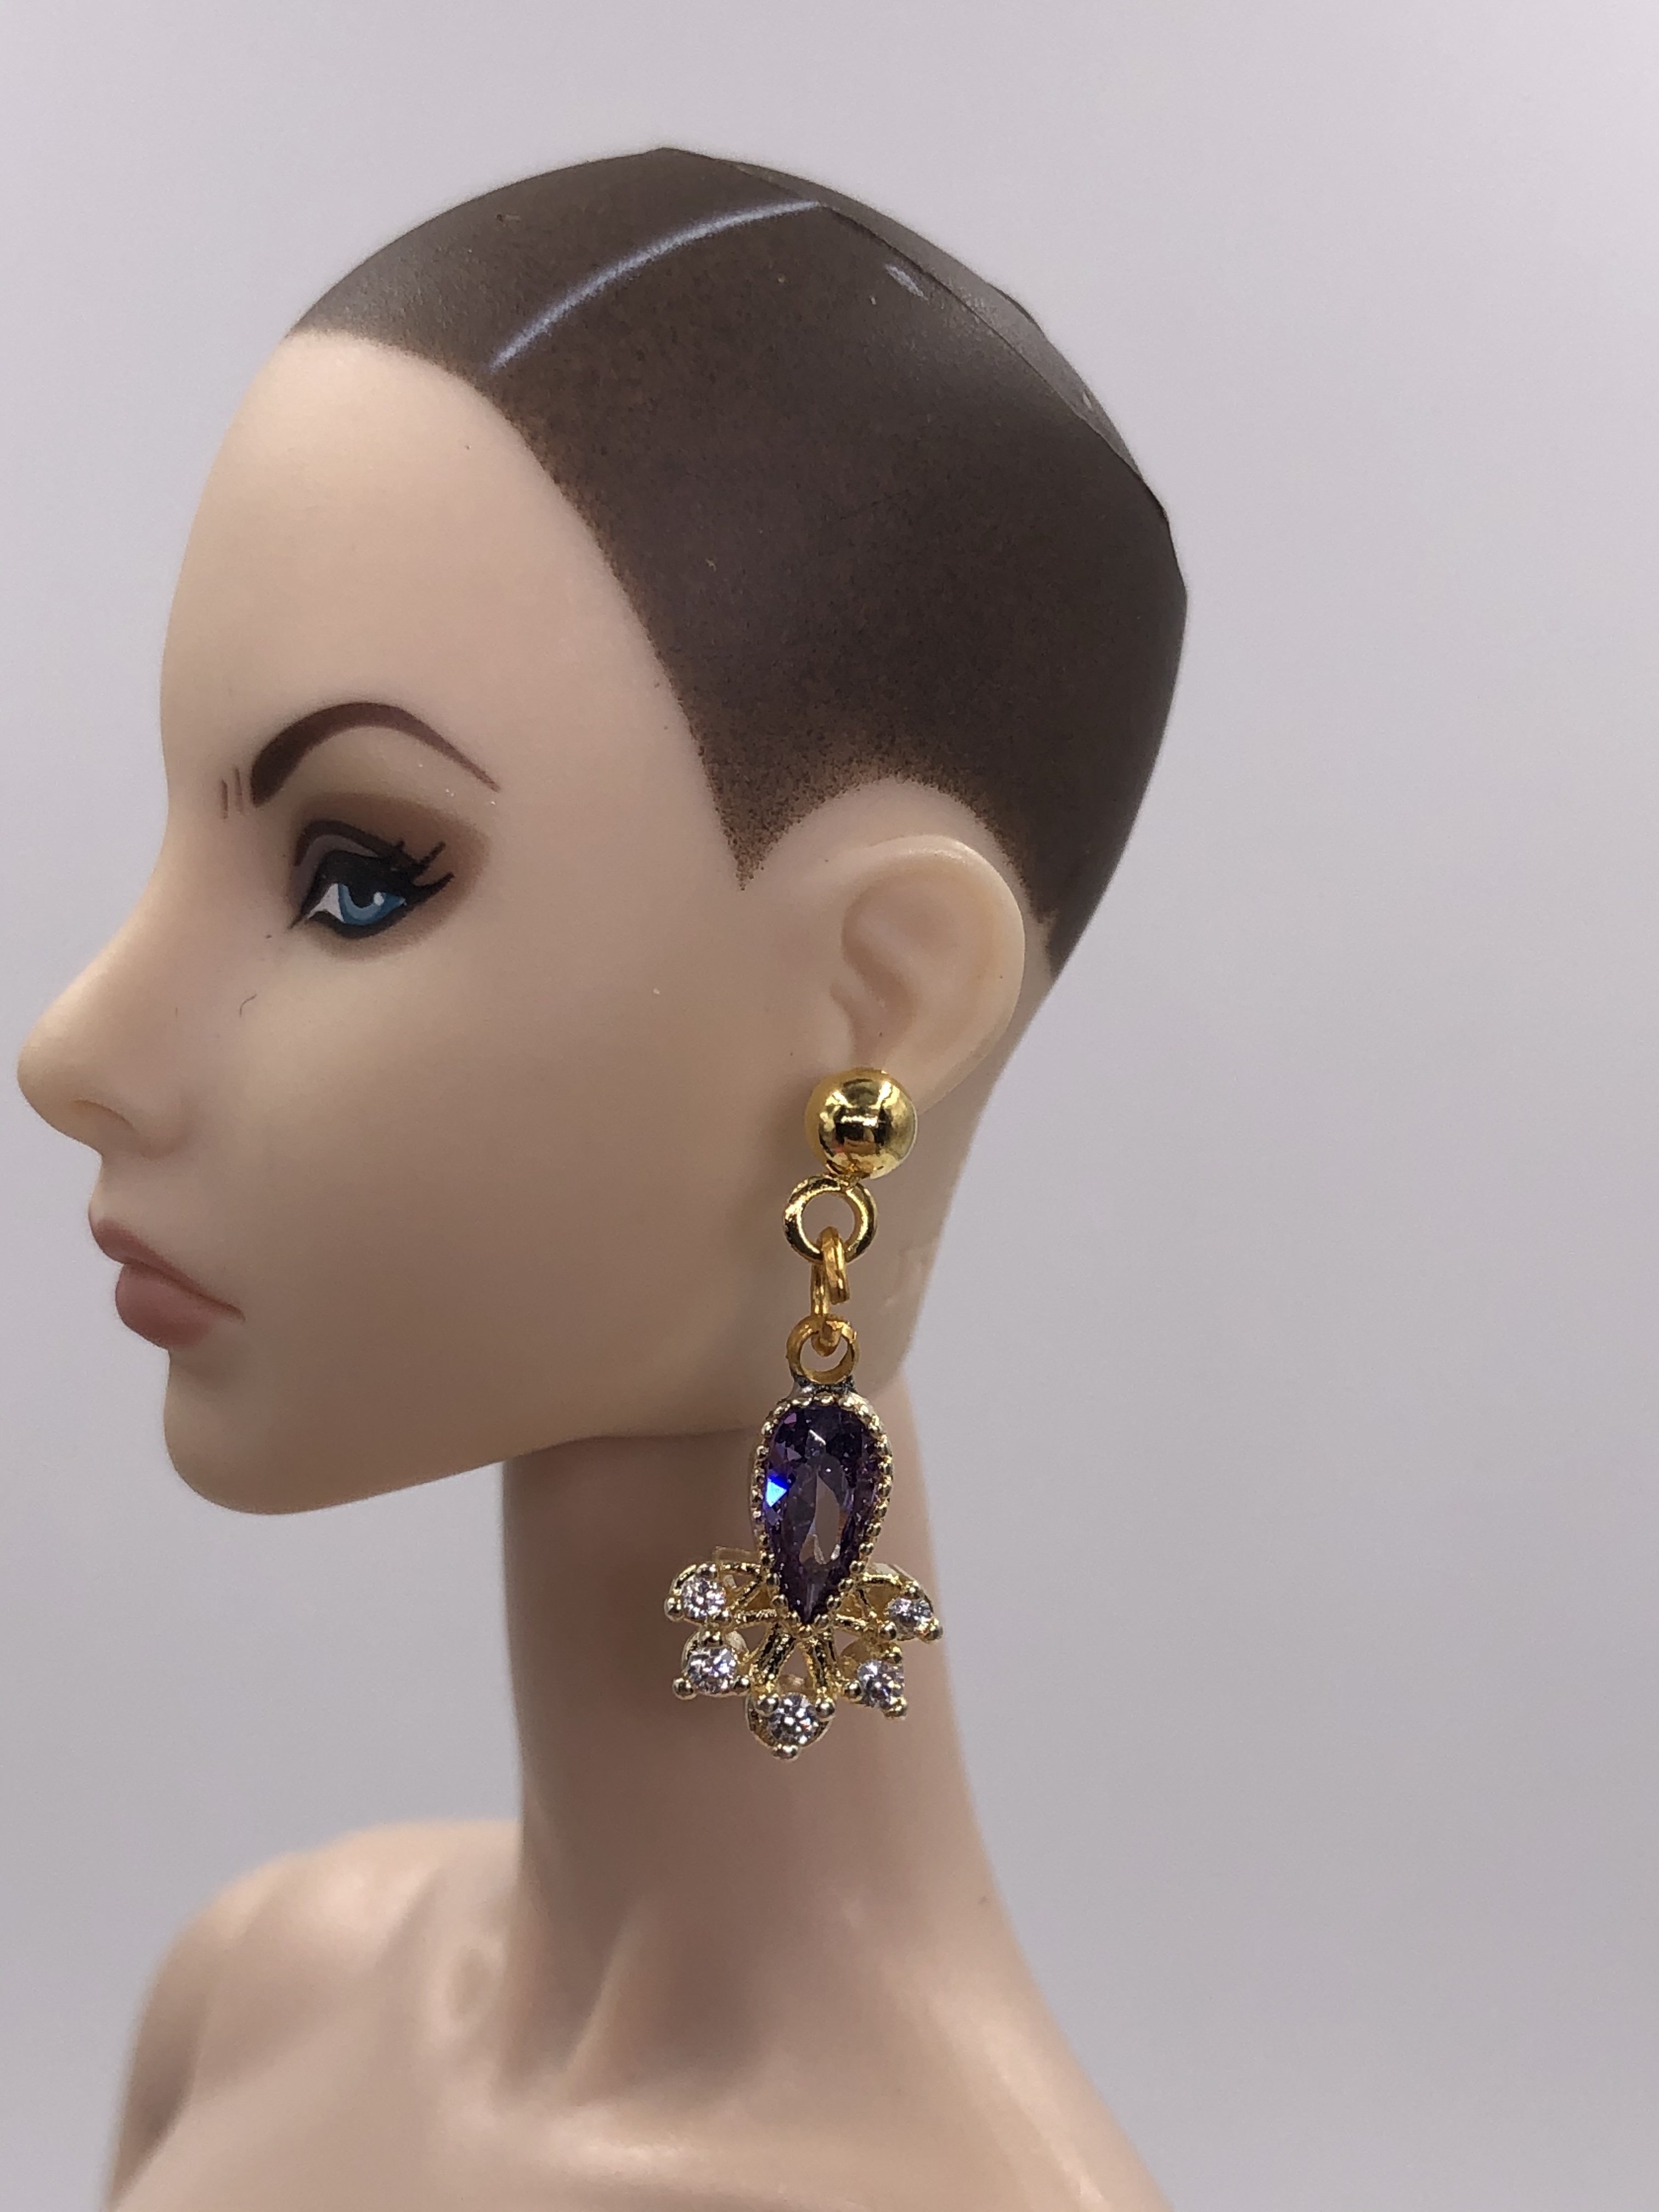 1:6 Jewelry Necklace Display Stand Fit For Fashion Royalty Integrity Toy Doll 